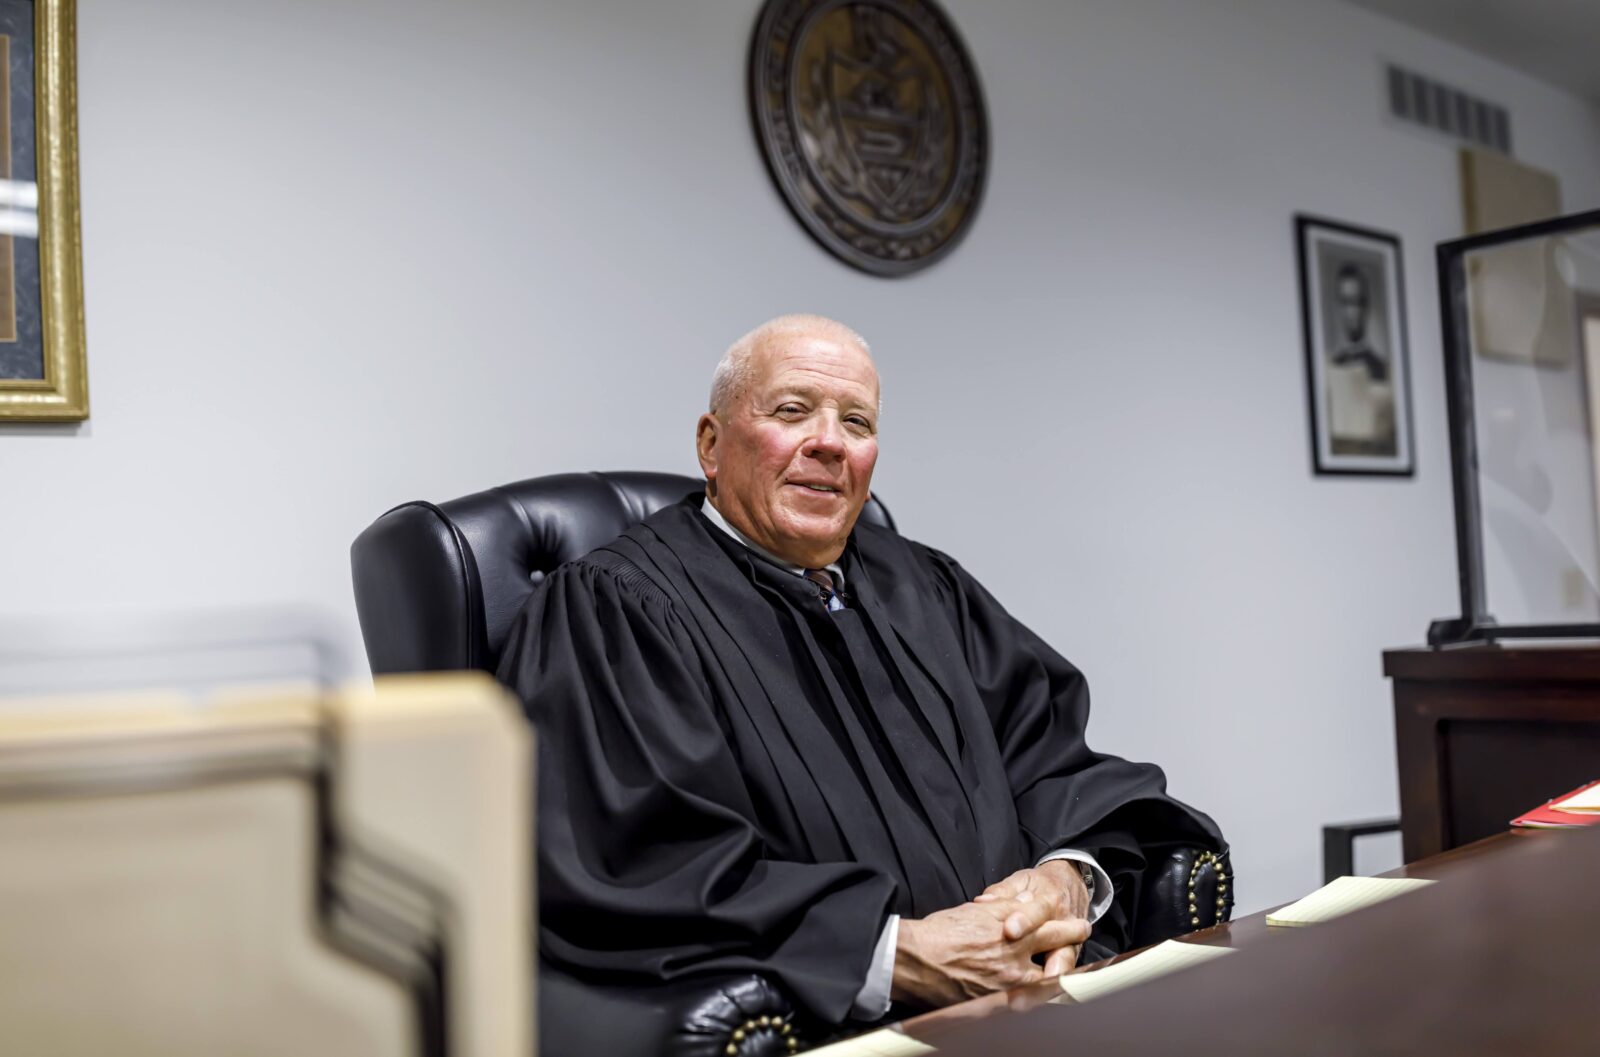 Magisterial District Judge David Judy, president of the Dauphin County Magisterial District Judge Association, said he has always considered being a district judge a full-time job, but knows not all of his colleagues agree. DAN GLEITER / PennLive